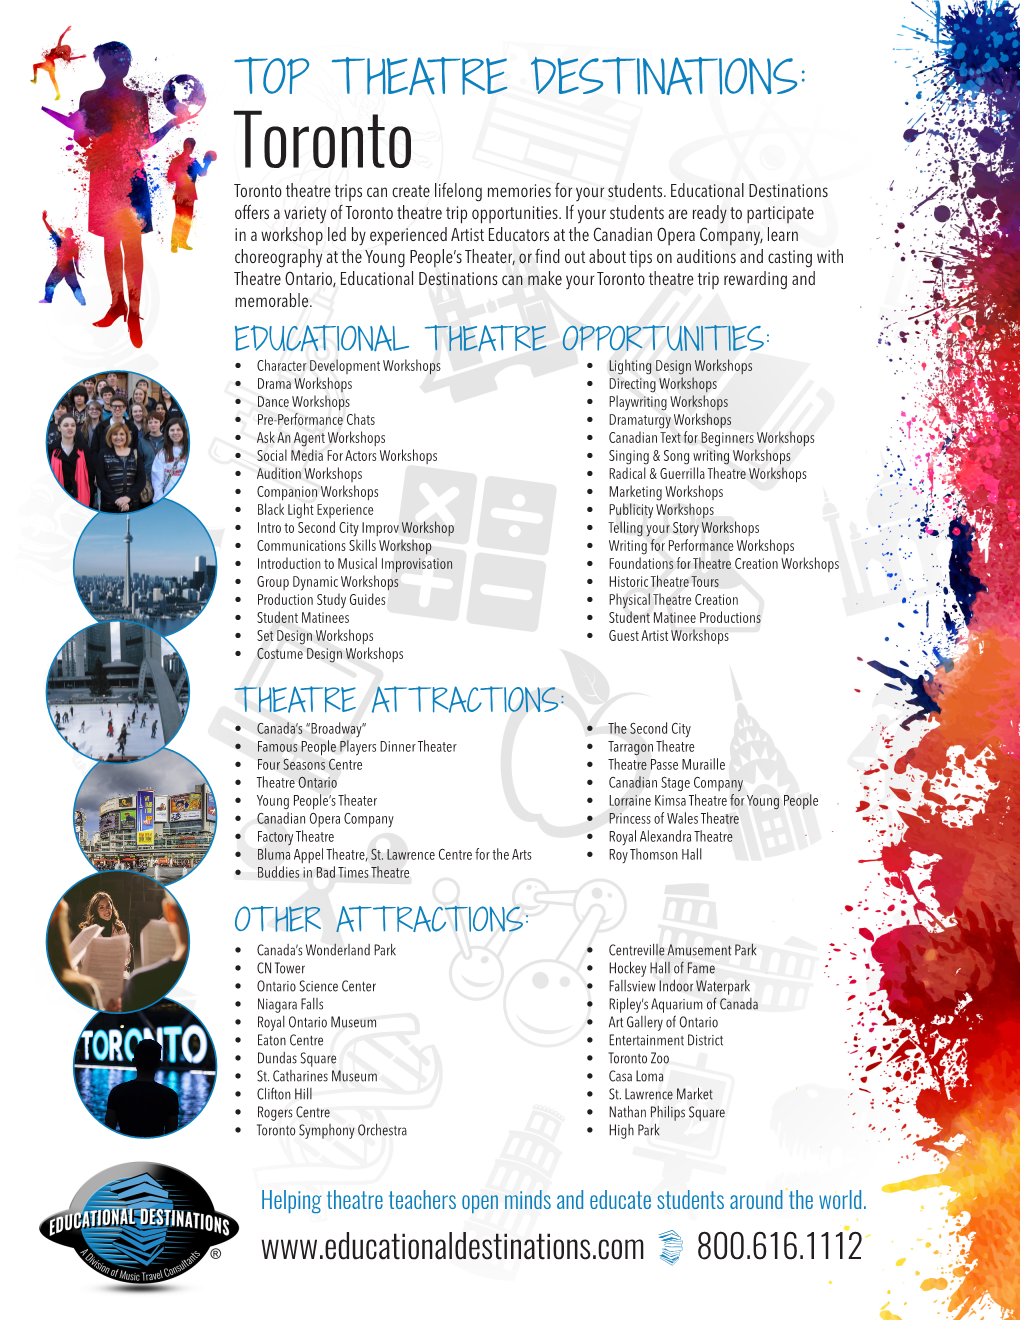 Toronto Toronto Theatre Trips Can Create Lifelong Memories for Your Students